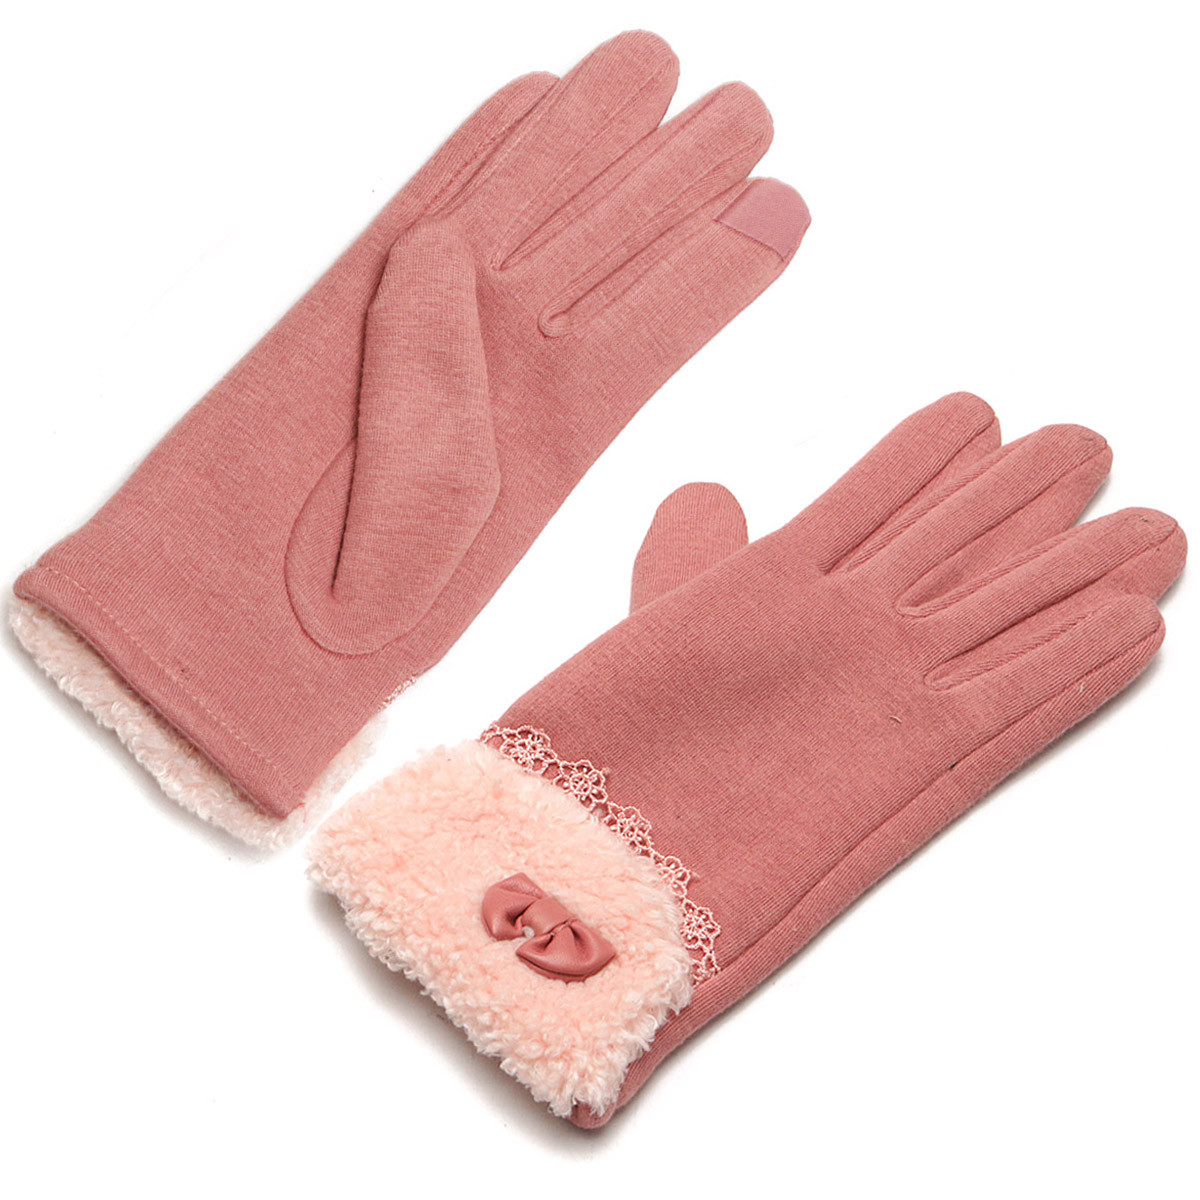 Women-Winter-Gloves-Touch-Screen-Warm-Gloves-Outdoor-Driving-Gloves-For-Smartphone-1095654-3